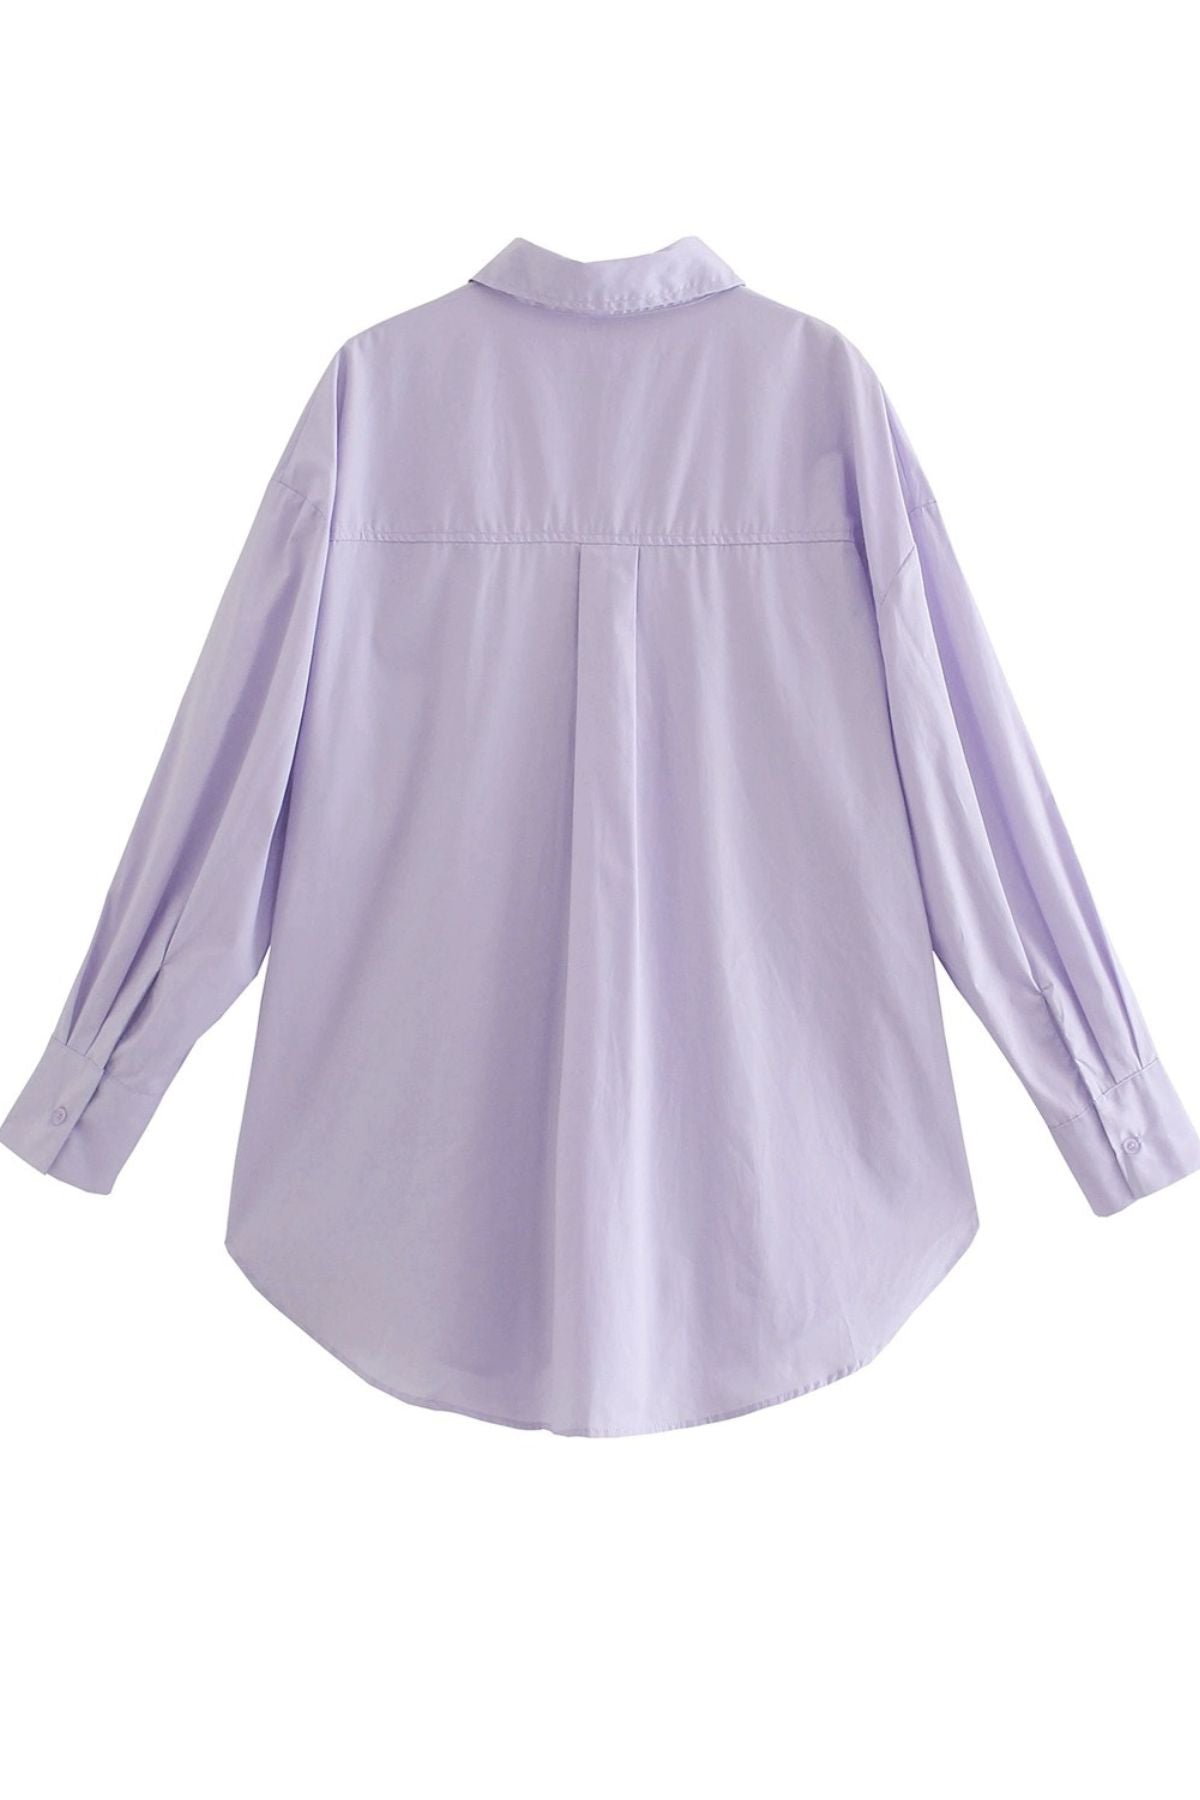 ESTHER Oversized Button-Down Pocket Shirt (Lilac)